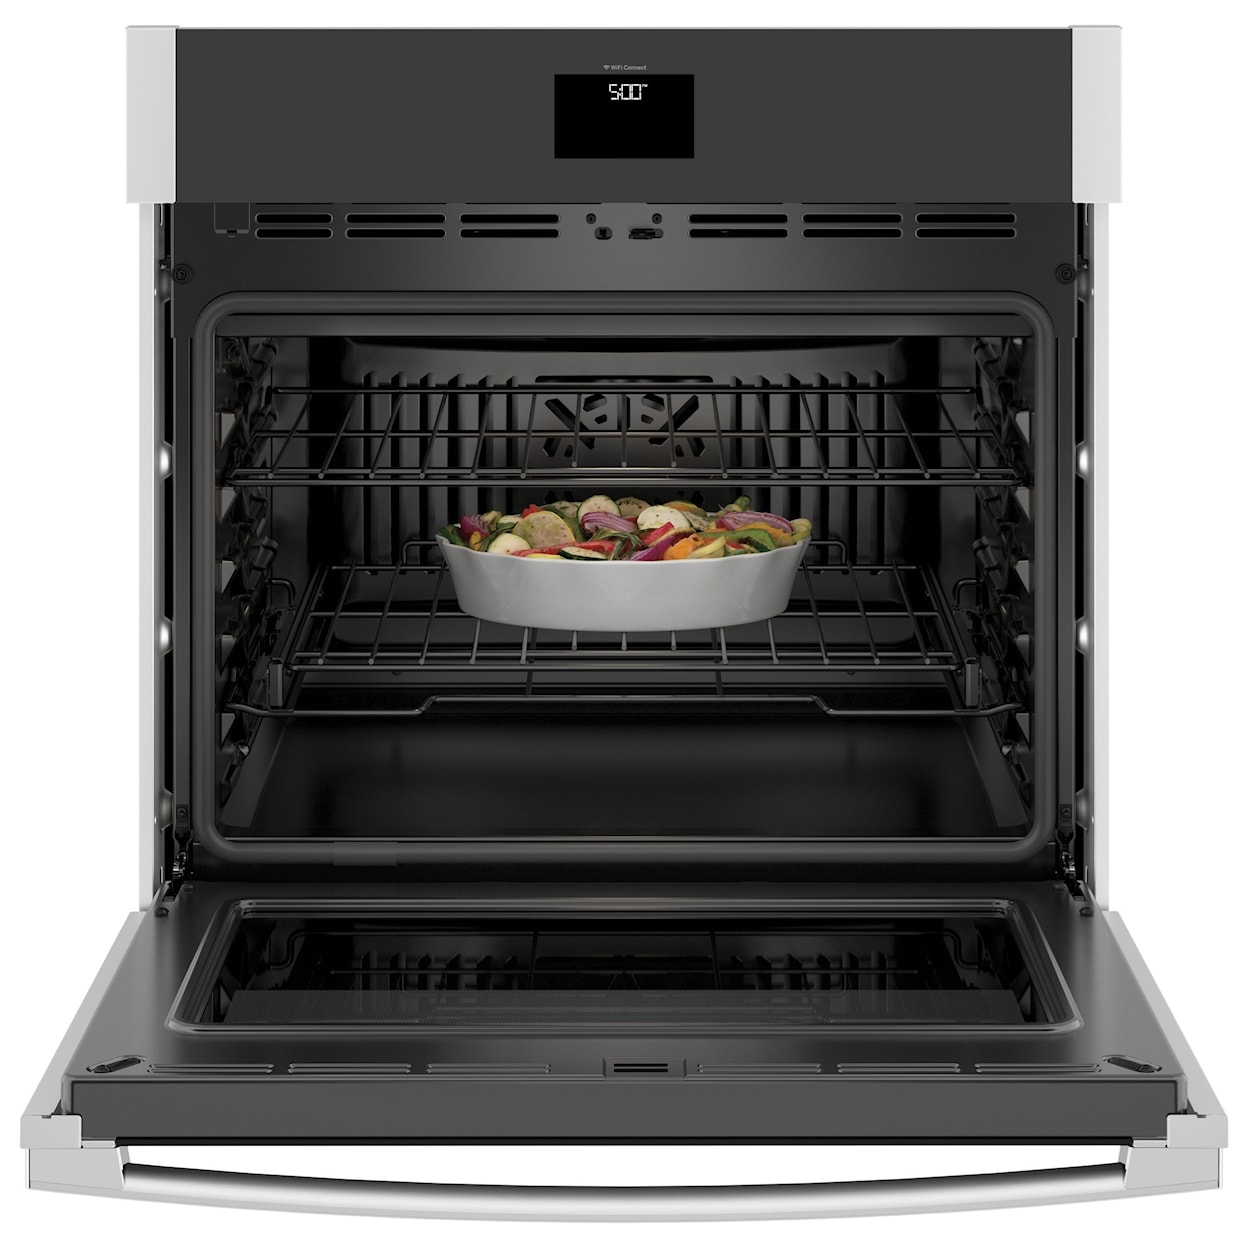 GE Appliances Electric Wall Oven 5 Cu. Ft. 30" Smart Built-In Convection Oven